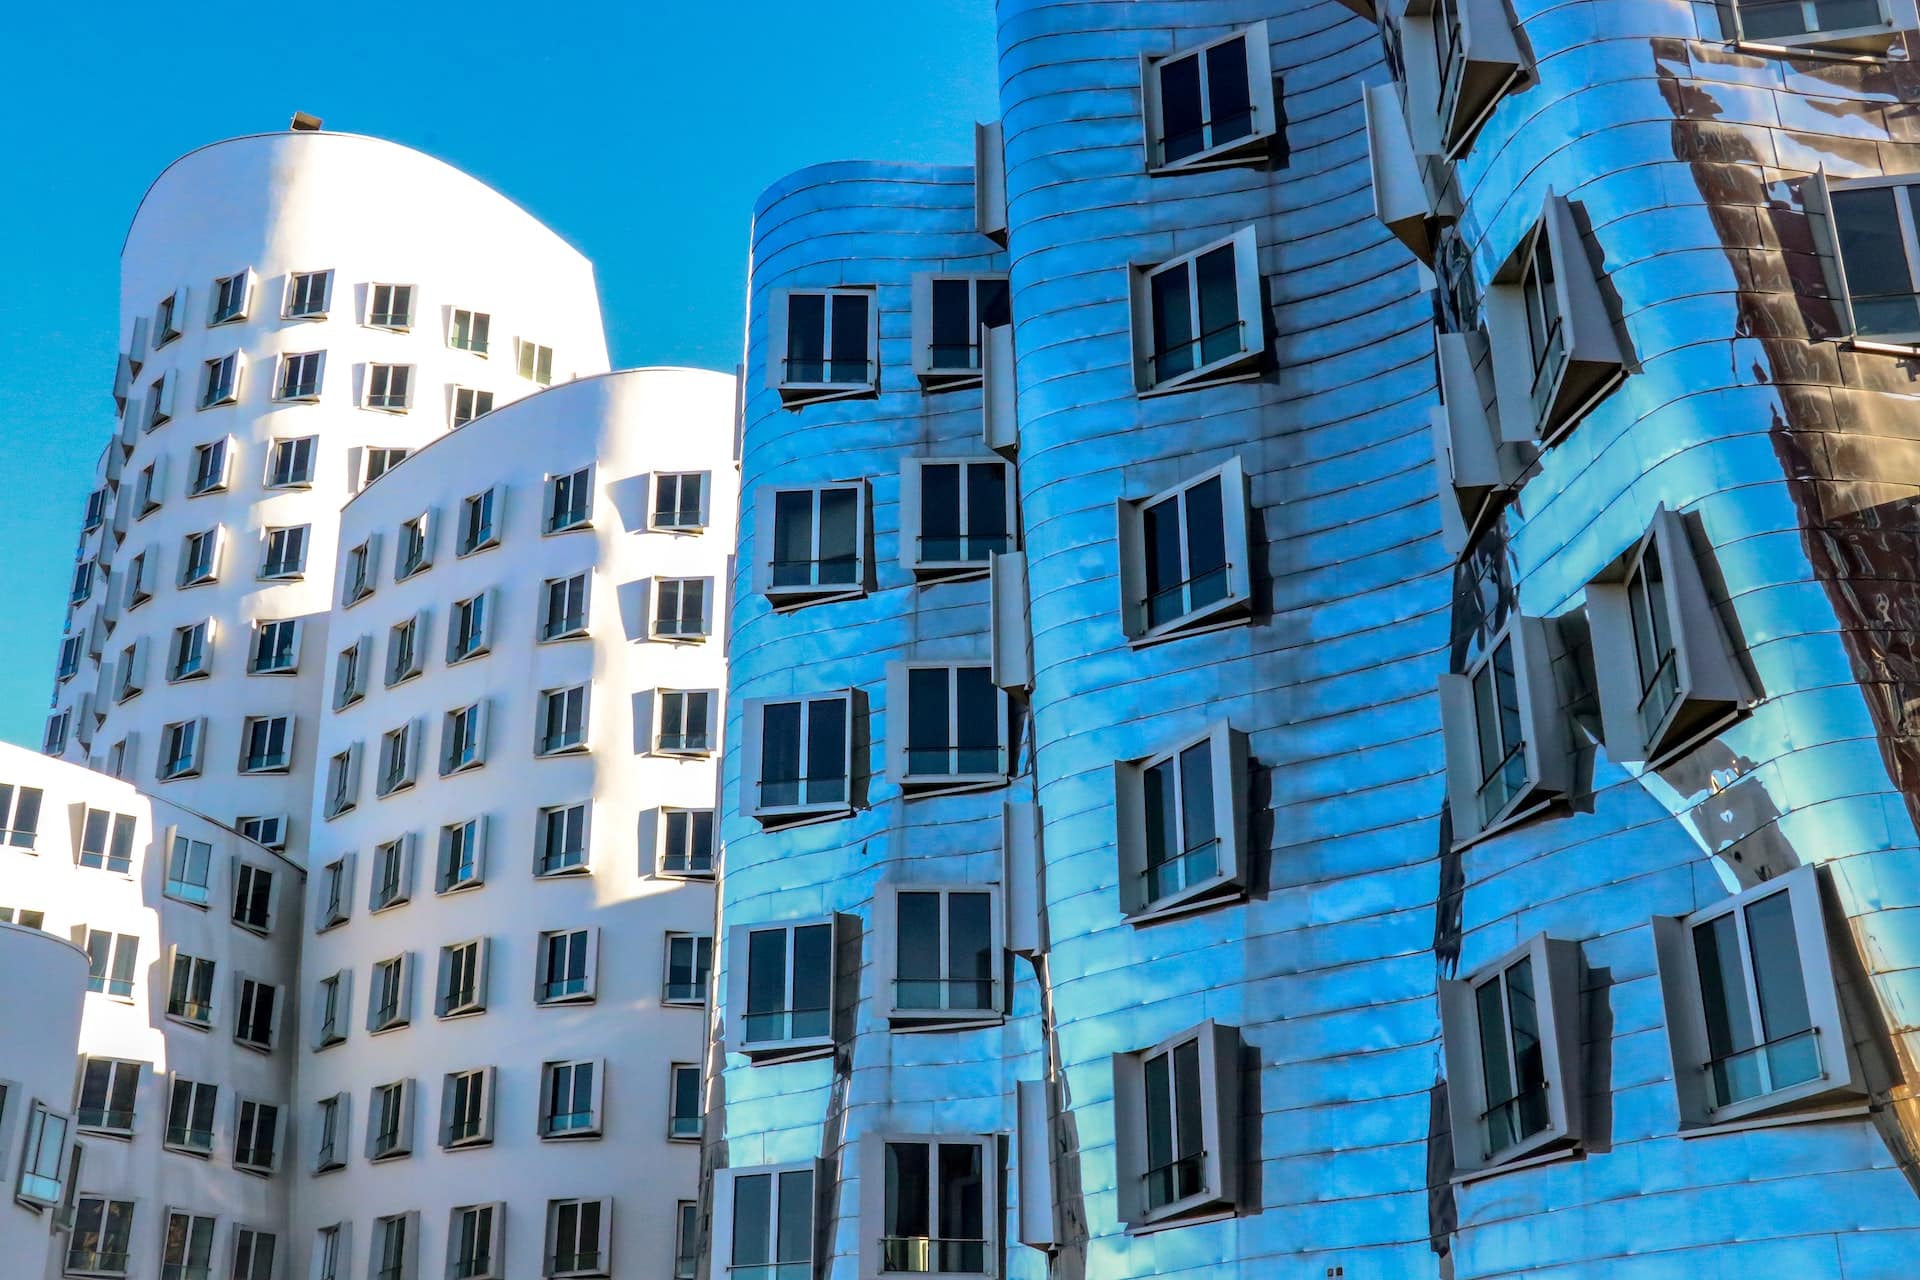 Home to some of the most striking contemporary buildings in the city, Unterbilk is a great area to get a taste of modern Düsseldorf